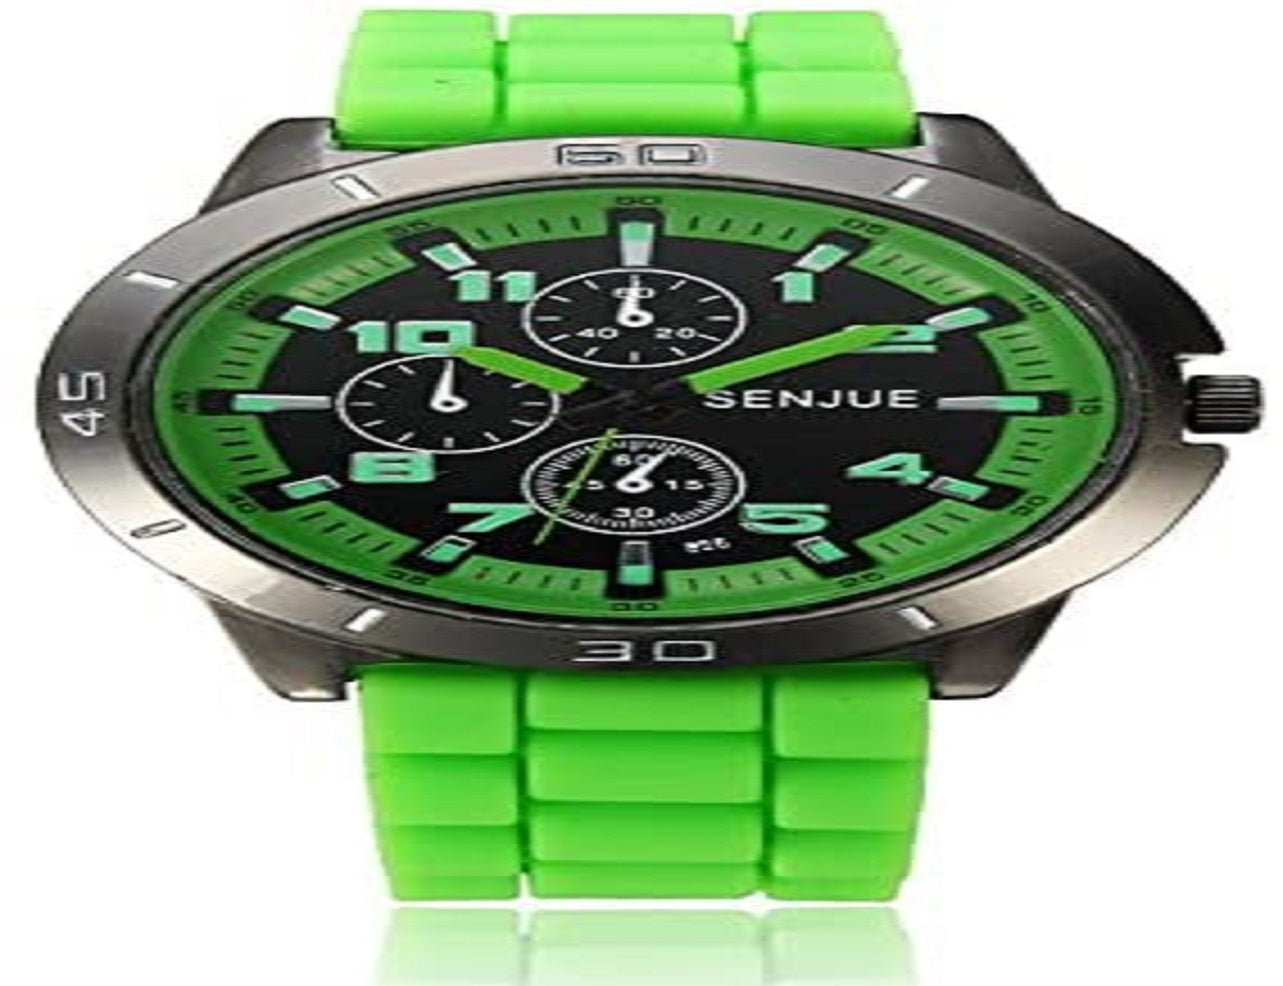 Silicon Men and Women Luxury Wrist Watch-green-All10dollars.com